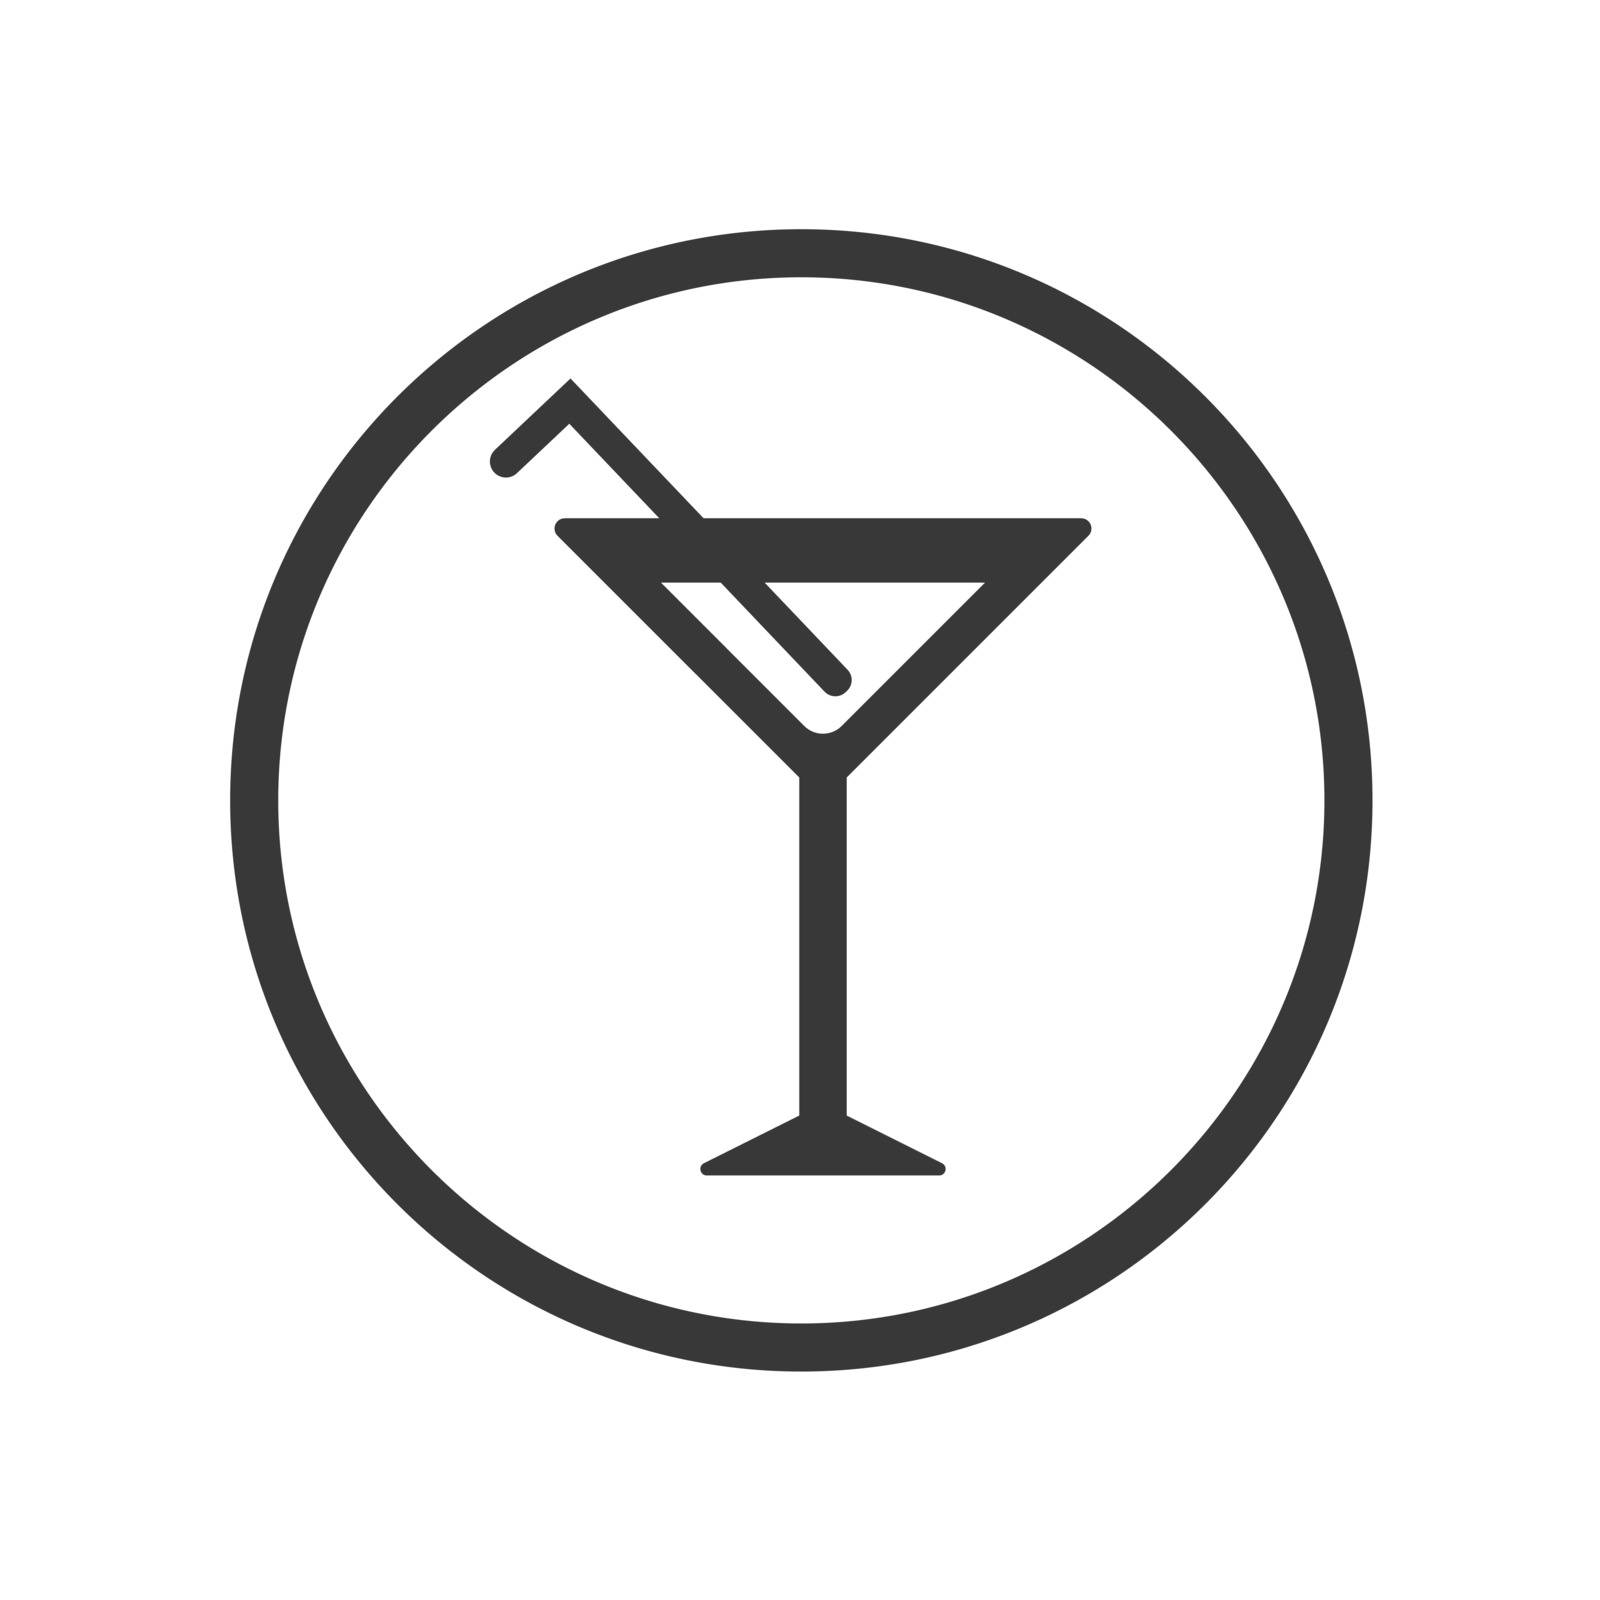 Cocktails icon, iconic symbol inside a circle, on white background.  Vector Iconic Design.